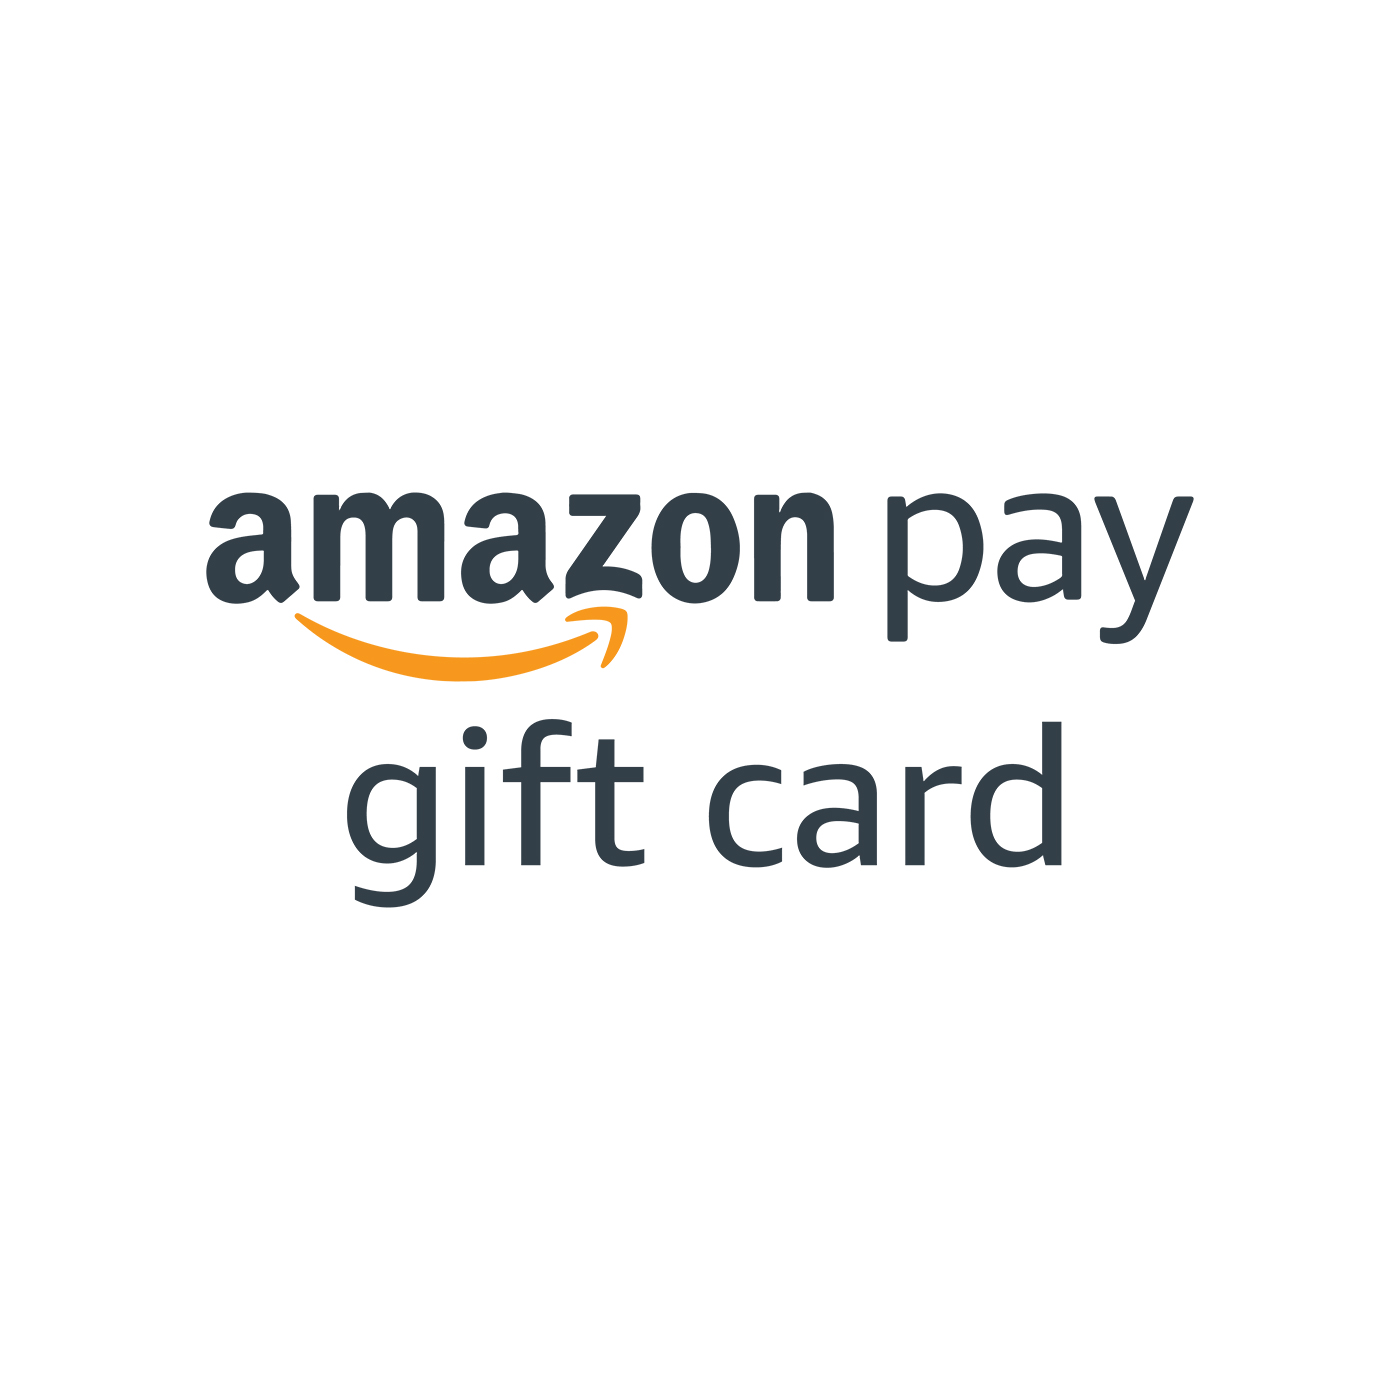 YouFirst - Bank of India Gift Card - Rs.1000 : Amazon.in: Gift Cards